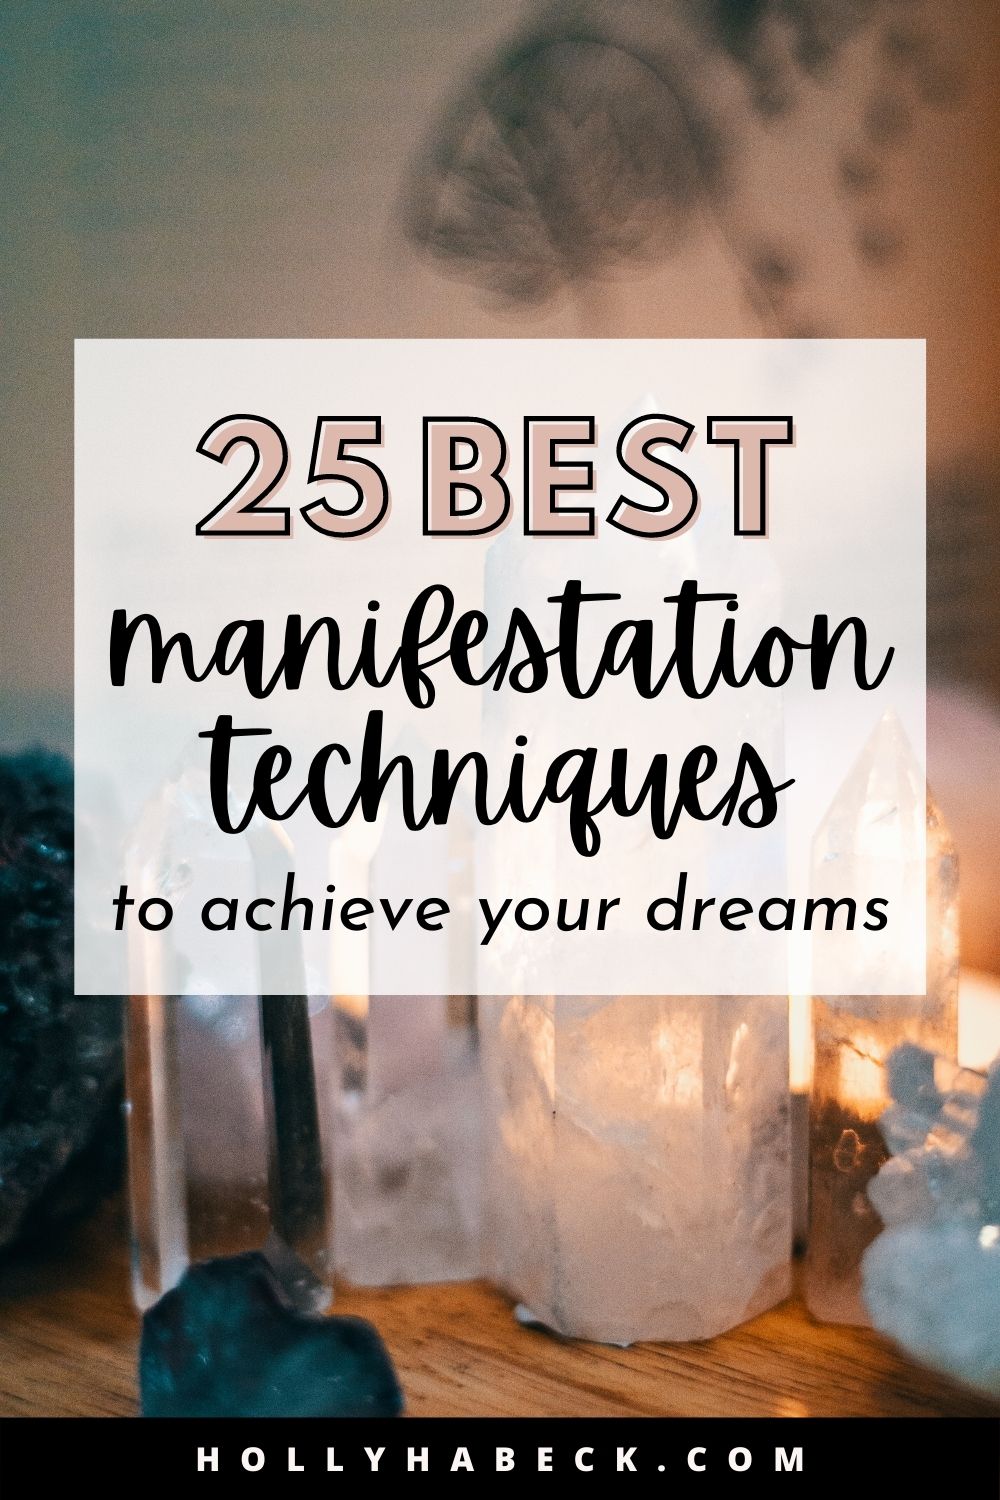 How to Manifest Something [With The 25 Most Powerful Manifestation Methods]